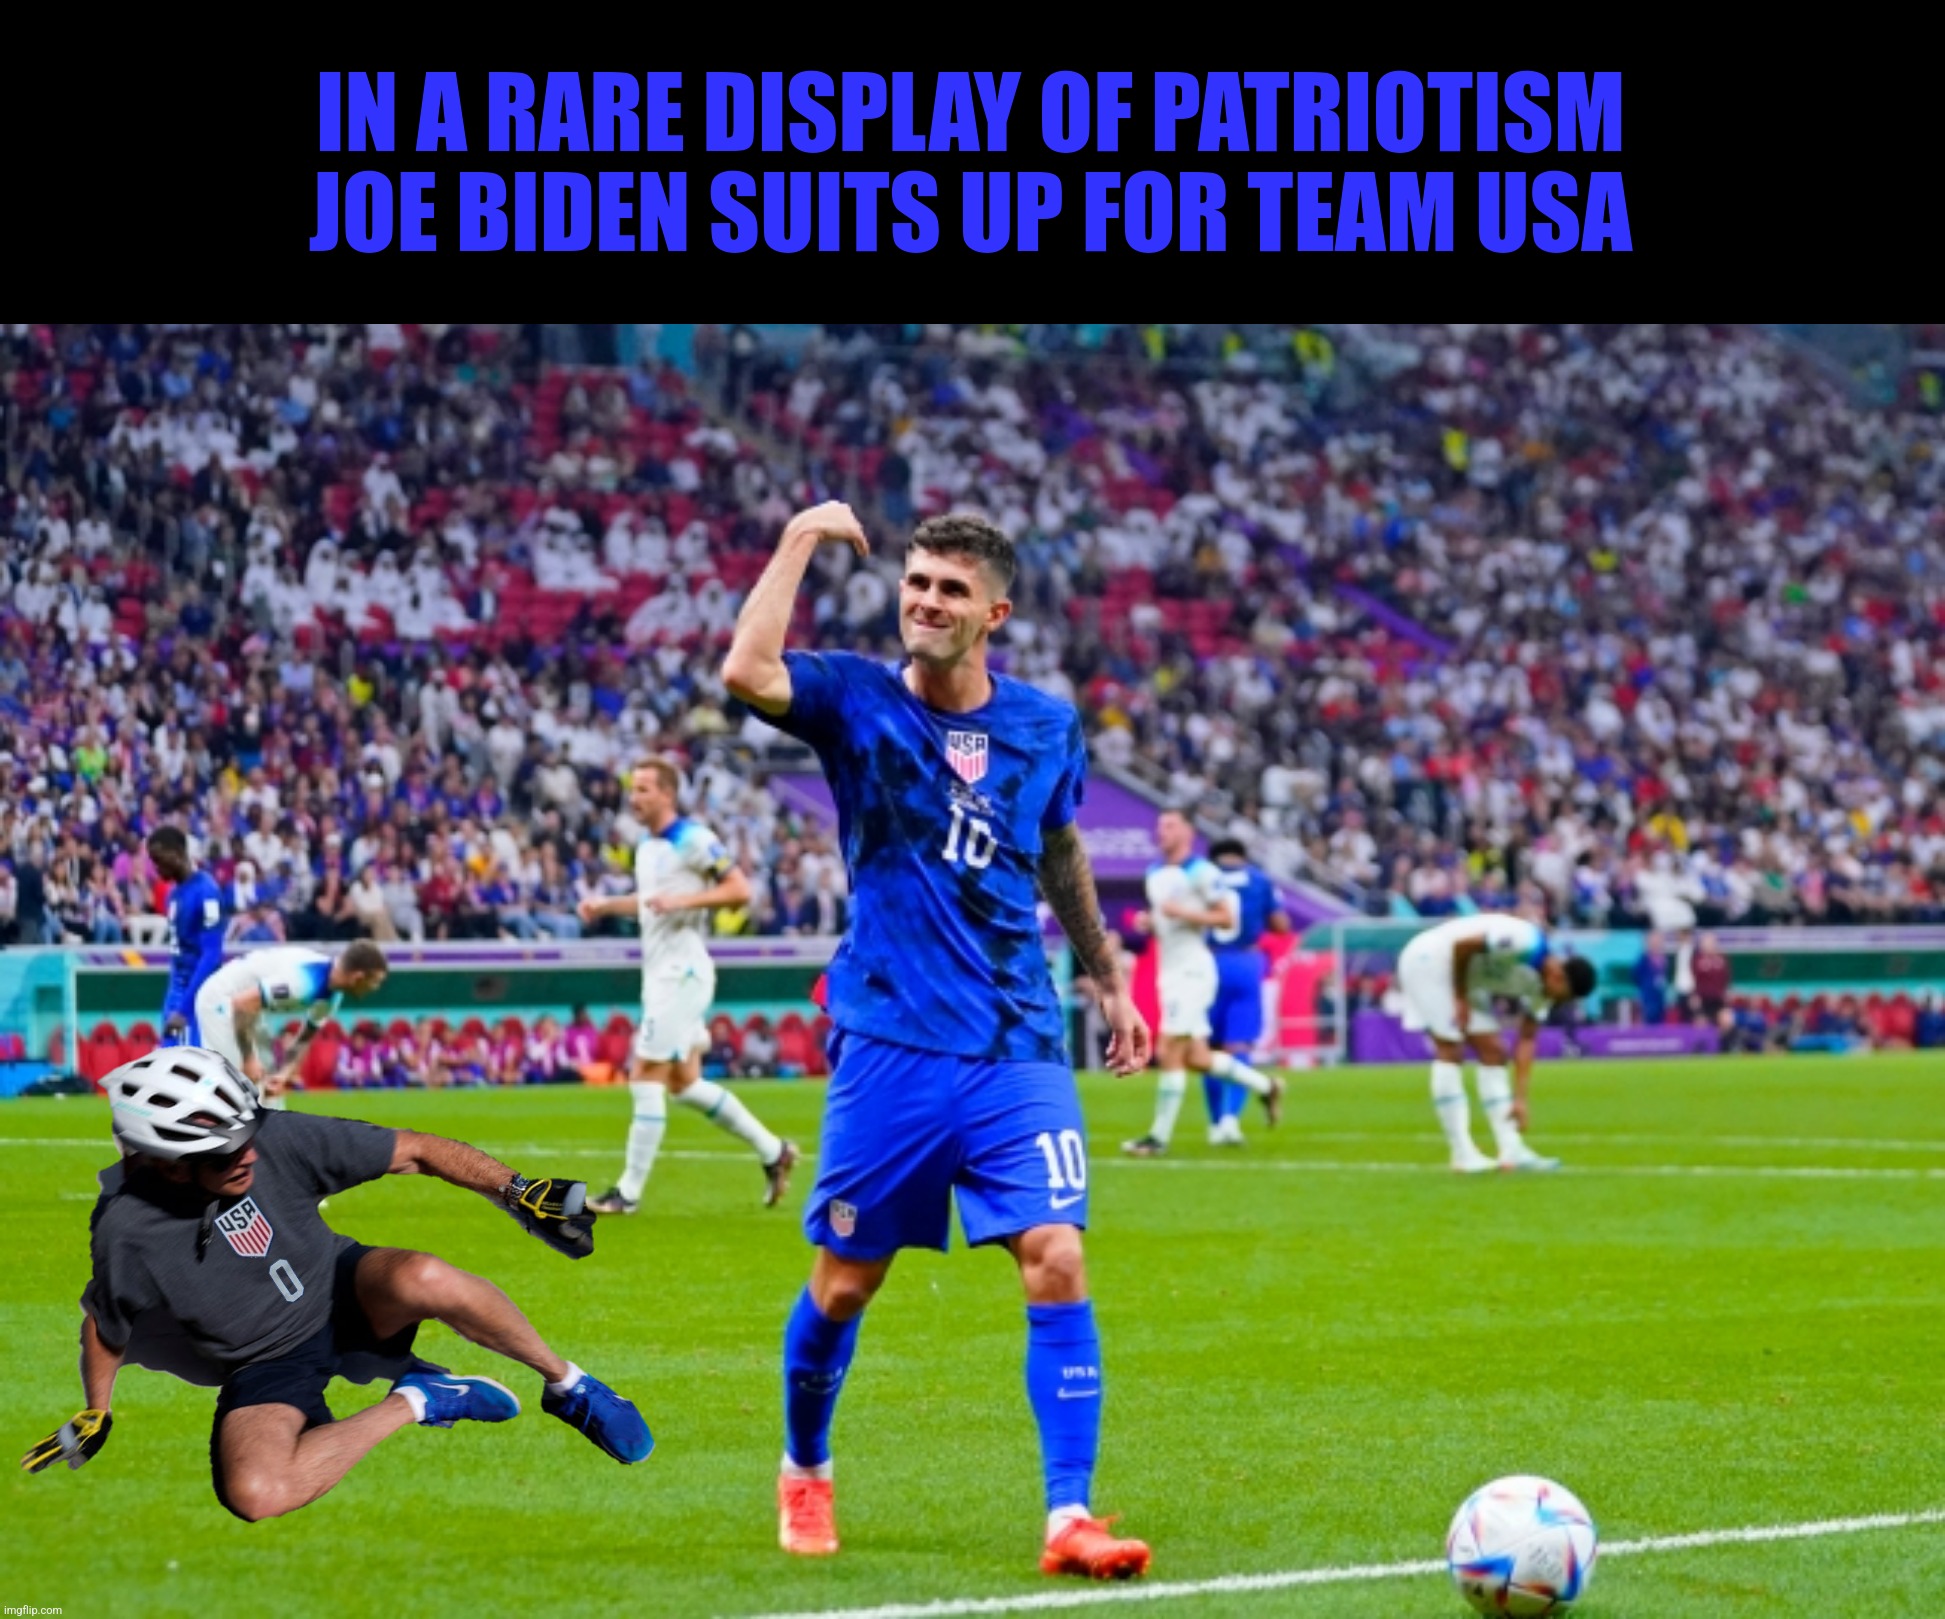 IN A RARE DISPLAY OF PATRIOTISM JOE BIDEN SUITS UP FOR TEAM USA | made w/ Imgflip meme maker